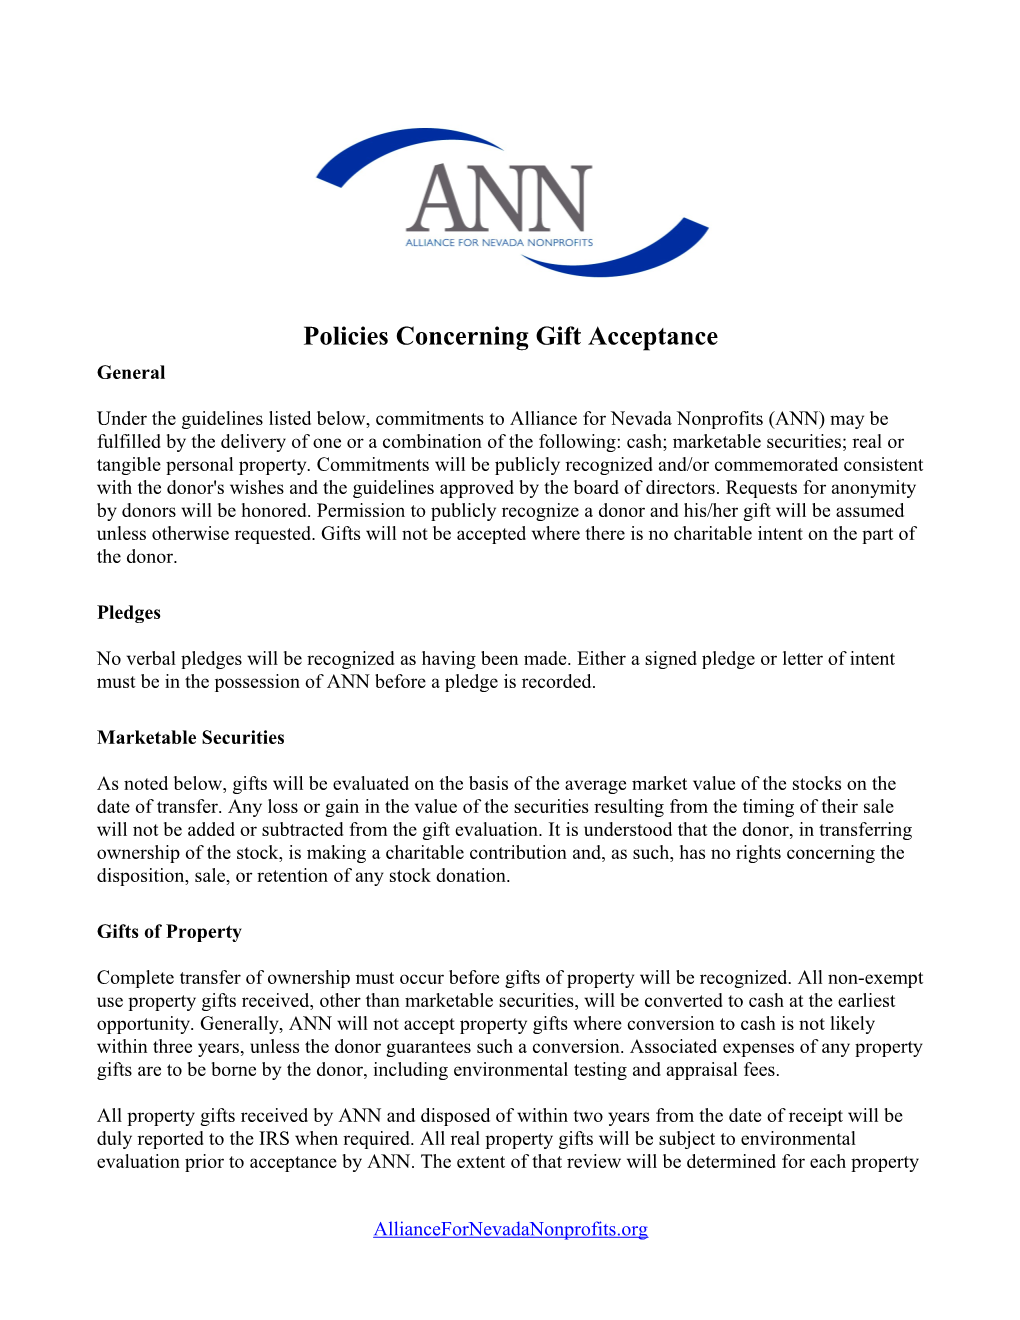 ANN Policies Concerning Gift Acceptance